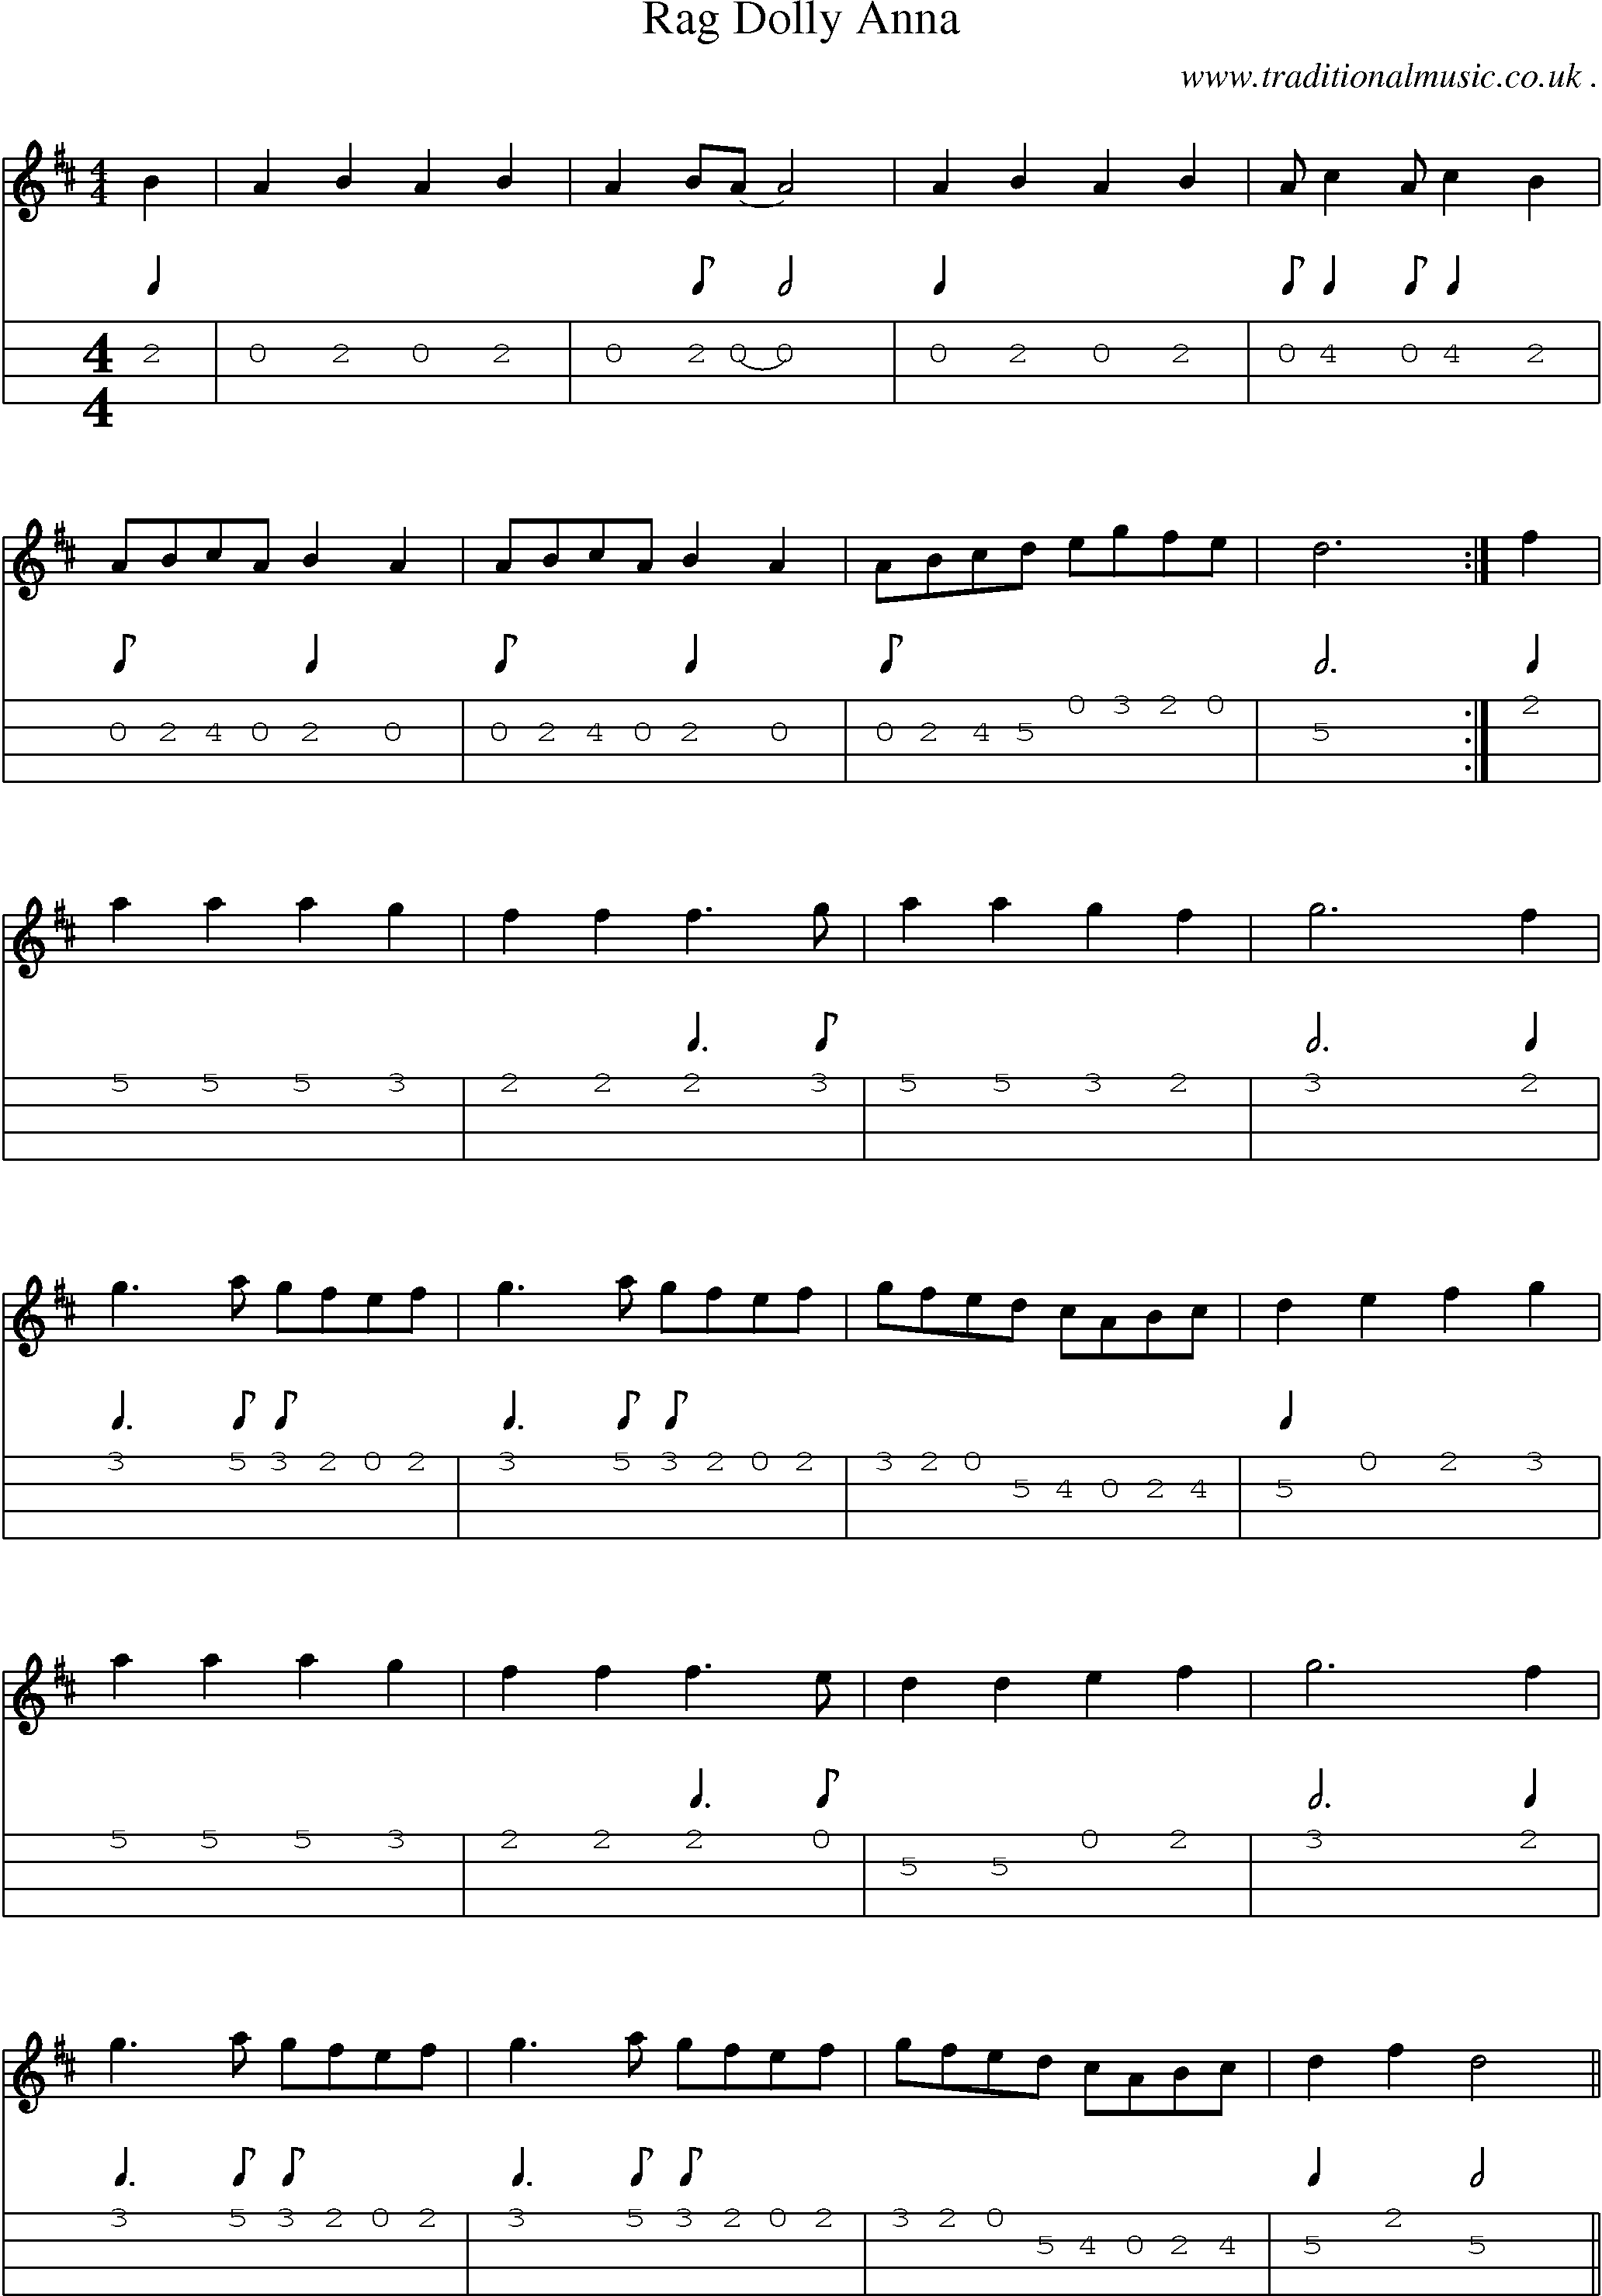 Sheet-Music and Mandolin Tabs for Rag Dolly Anna